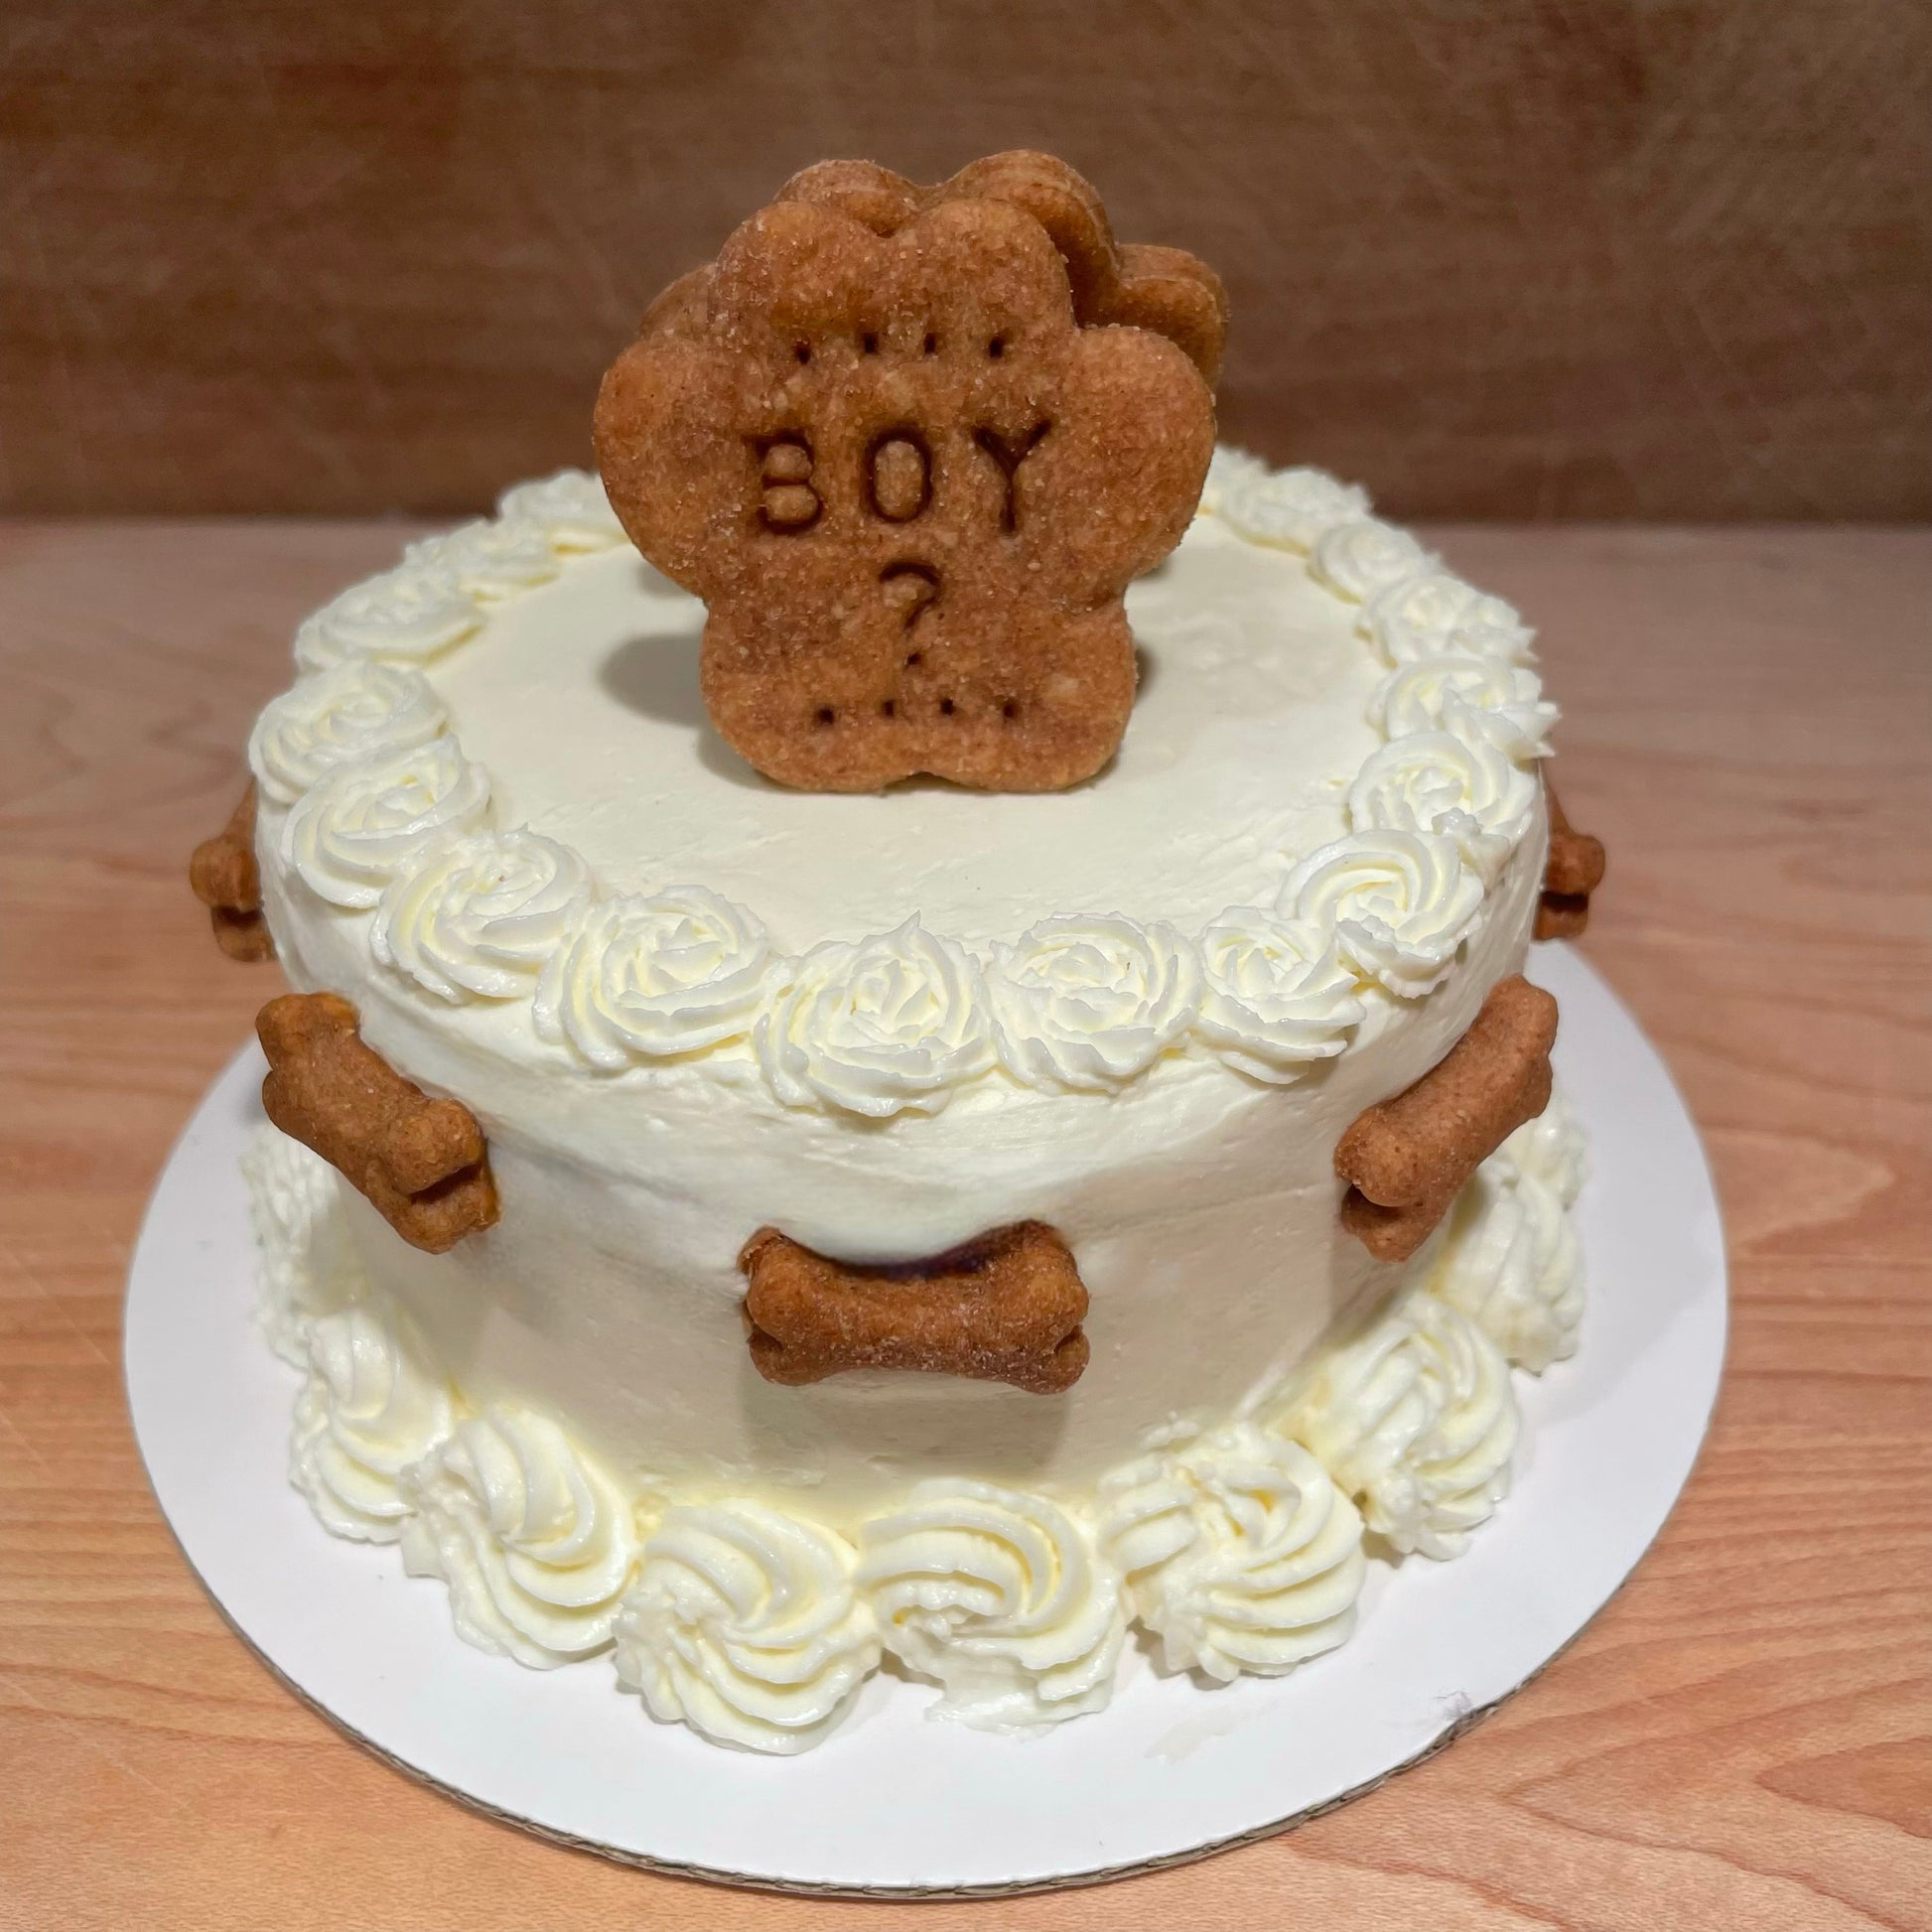 A white round gender reveal cake with white flowers on the top and bottom edges. Mini dog bone cookies surround the cake and a dog paw cookie sits atop the cake with, "BOY?," personalized onto it.